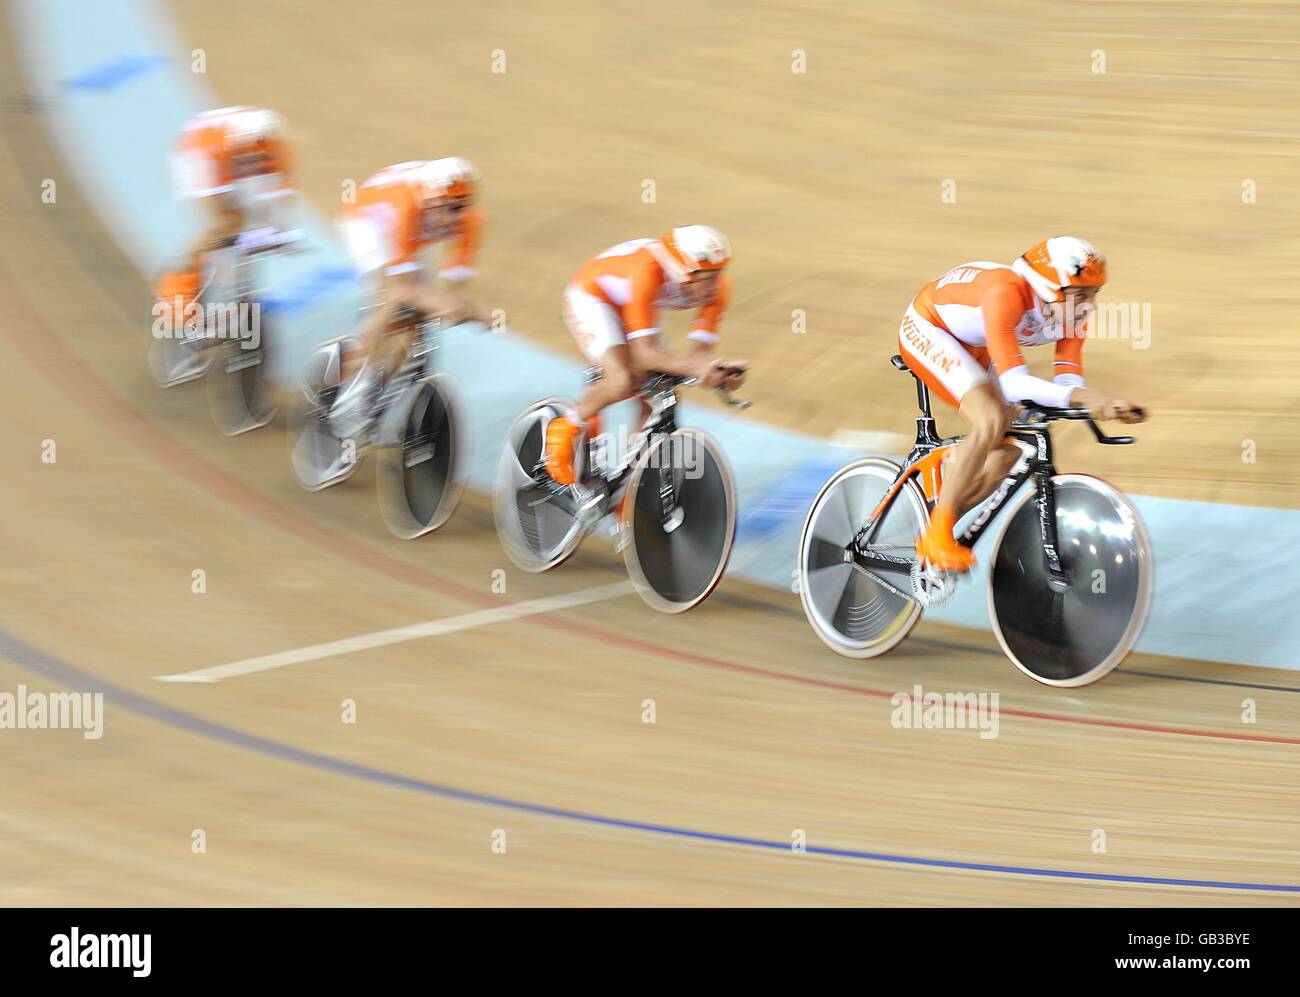 The Netherlands Pursuit Team in action at the Laoshan Velodrome on Day 9 of the 2008 Olympic Games in Beijing. Stock Photo